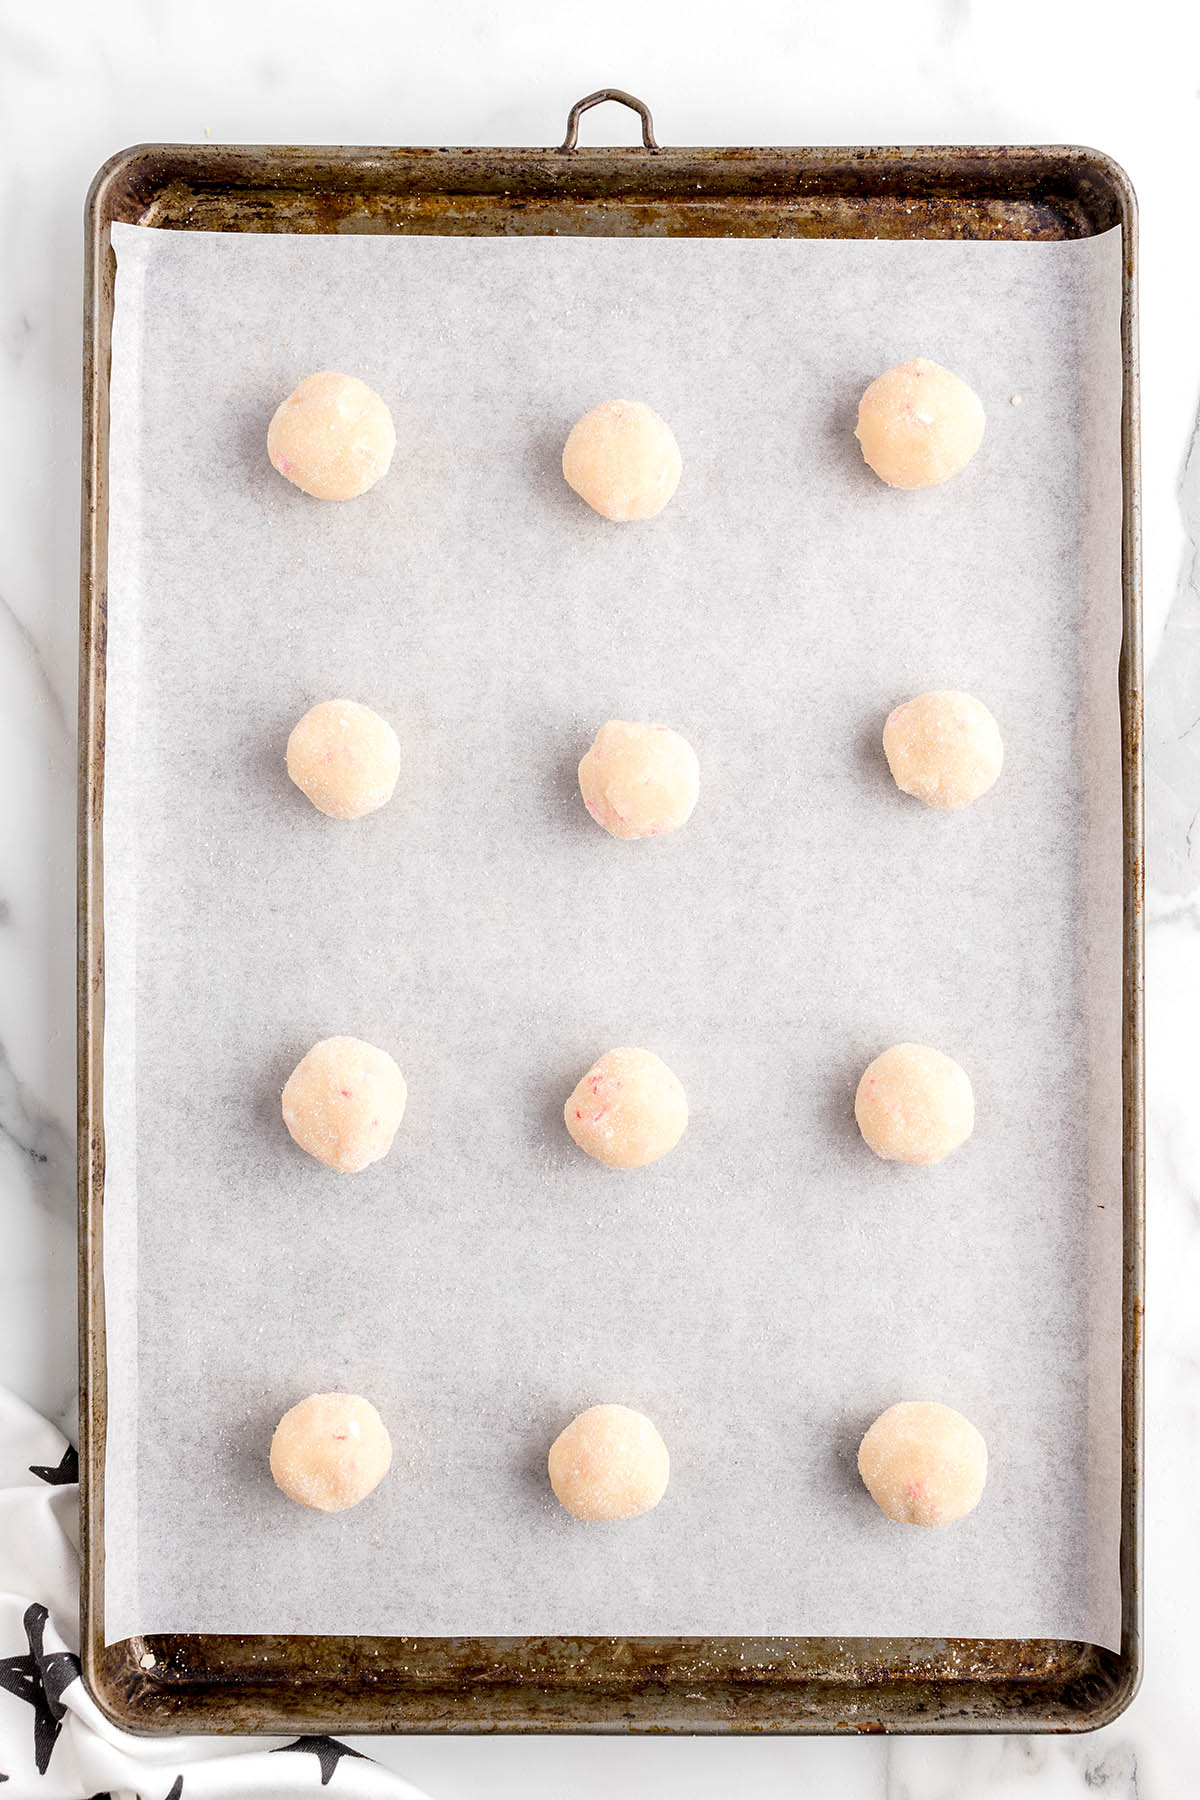 place dough balls in baking tray